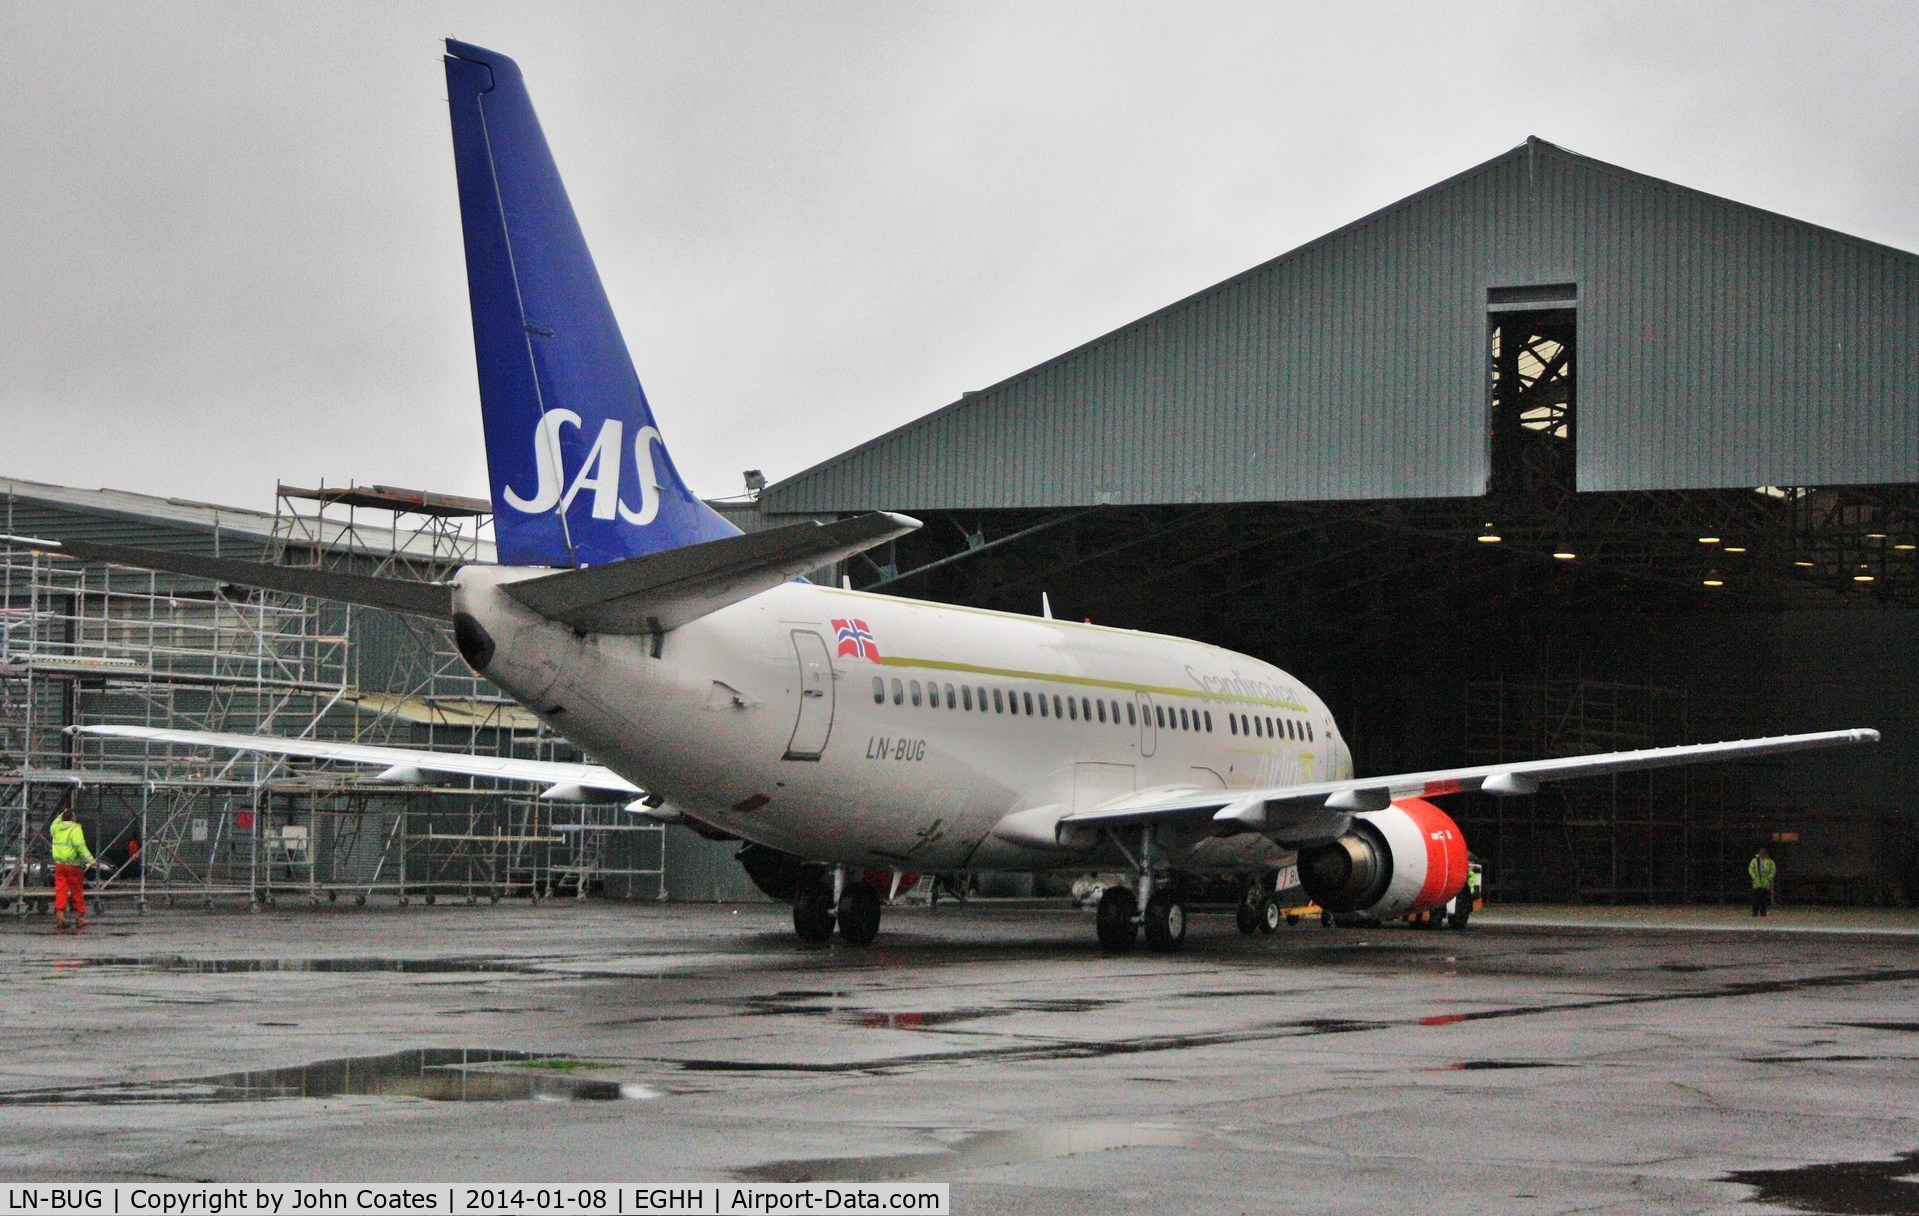 LN-BUG, 1997 Boeing 737-505 C/N 27631, Entering paintshop for respray to Bahamasair livery